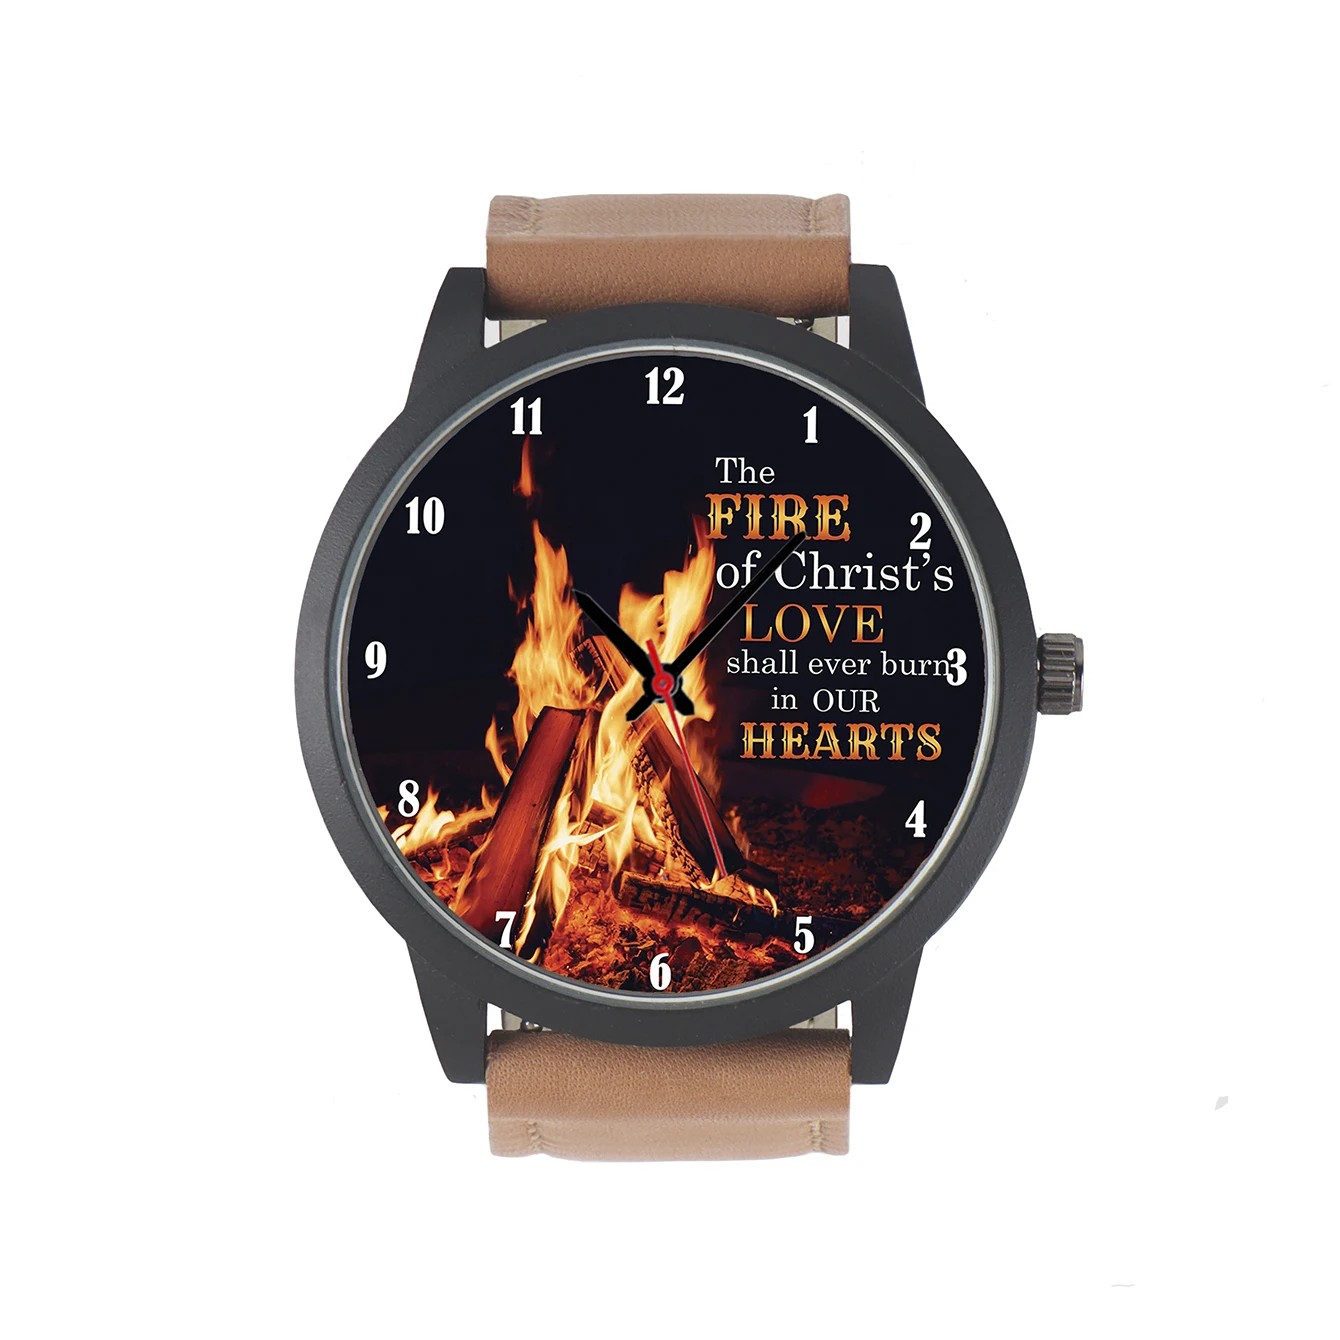 Free Shipping Factory Store Fire Design Christ's Love Gifts For followers of Christianity Men's Battery Quartz Wrist Watch battery 26s1018 4750mah for amazon kindle fire hd 8 6th gen pr53dc mc 28a8b8